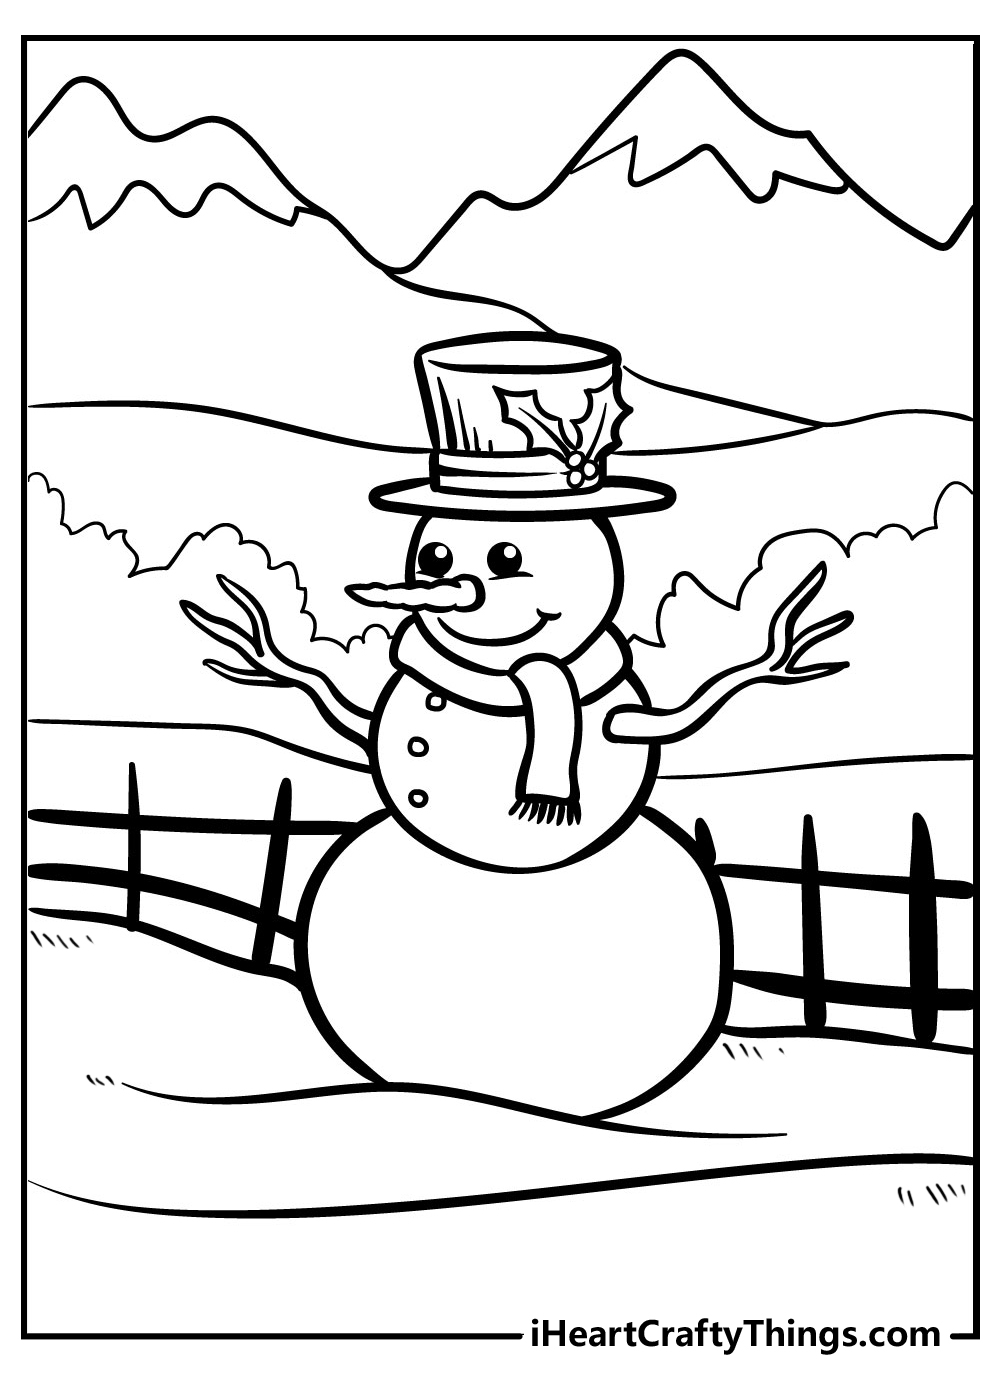 Christmas coloring snowman coloring images free download